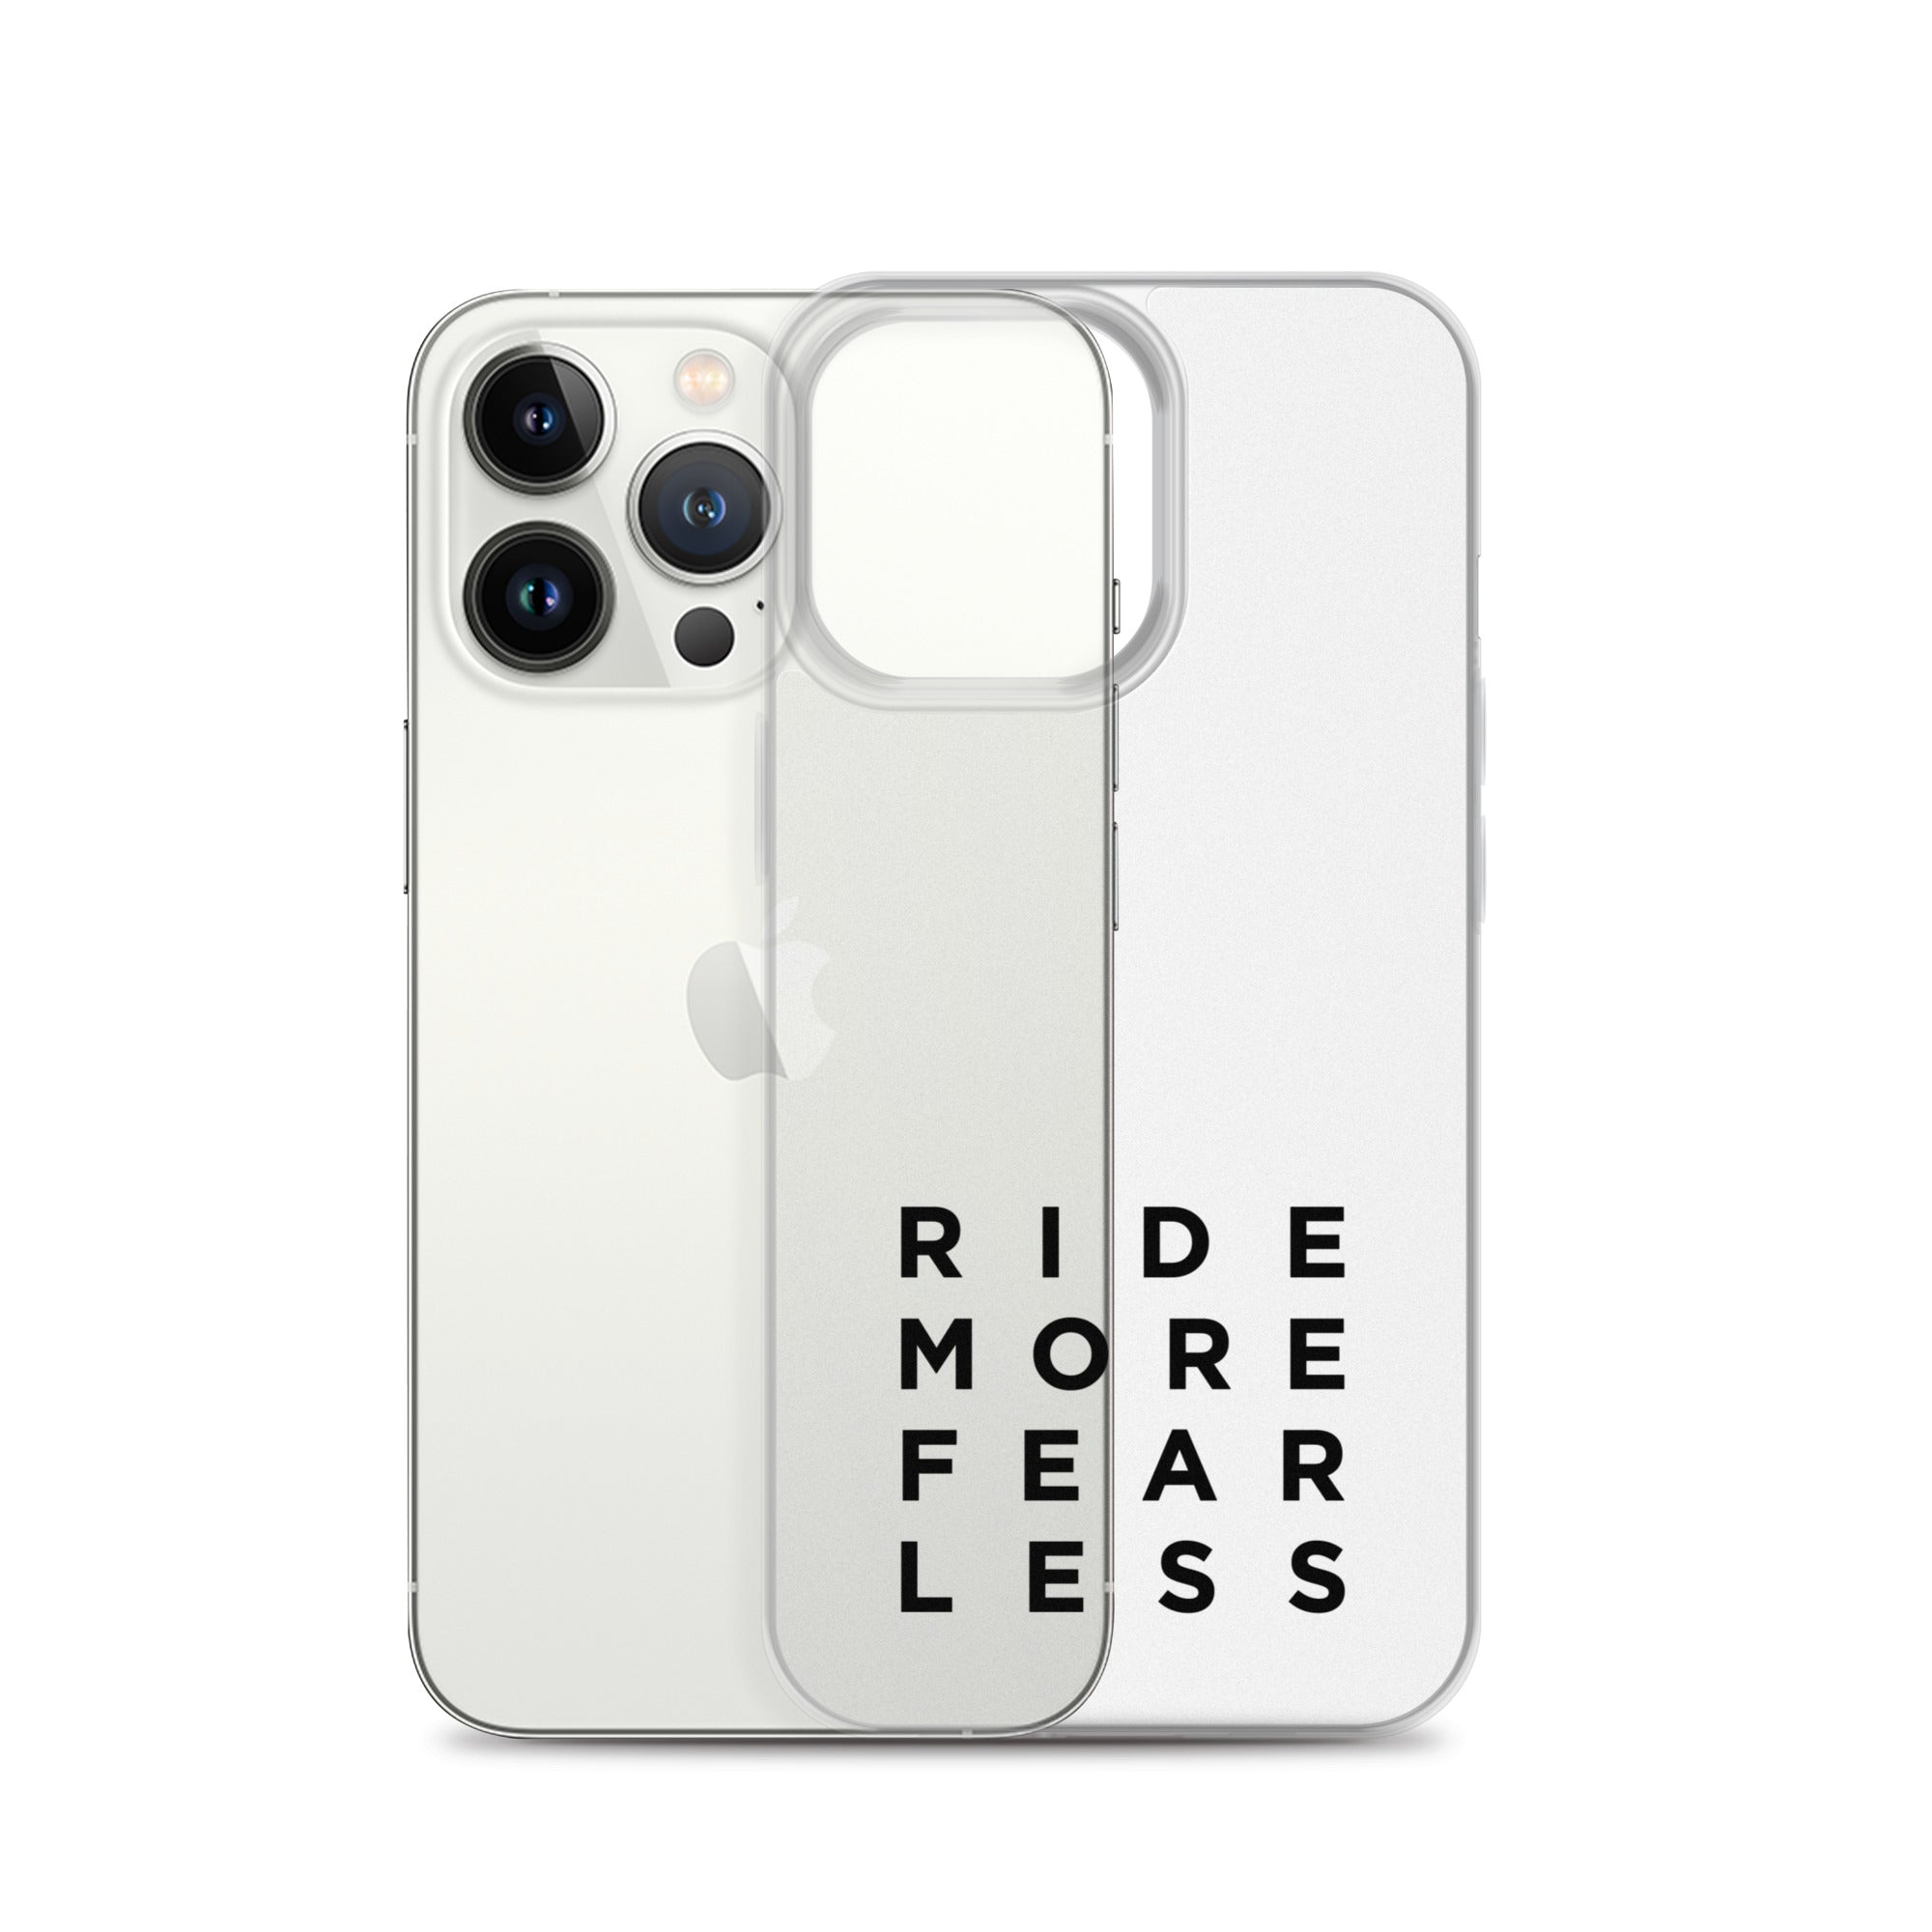 Ride More Fear Less iPhone Case